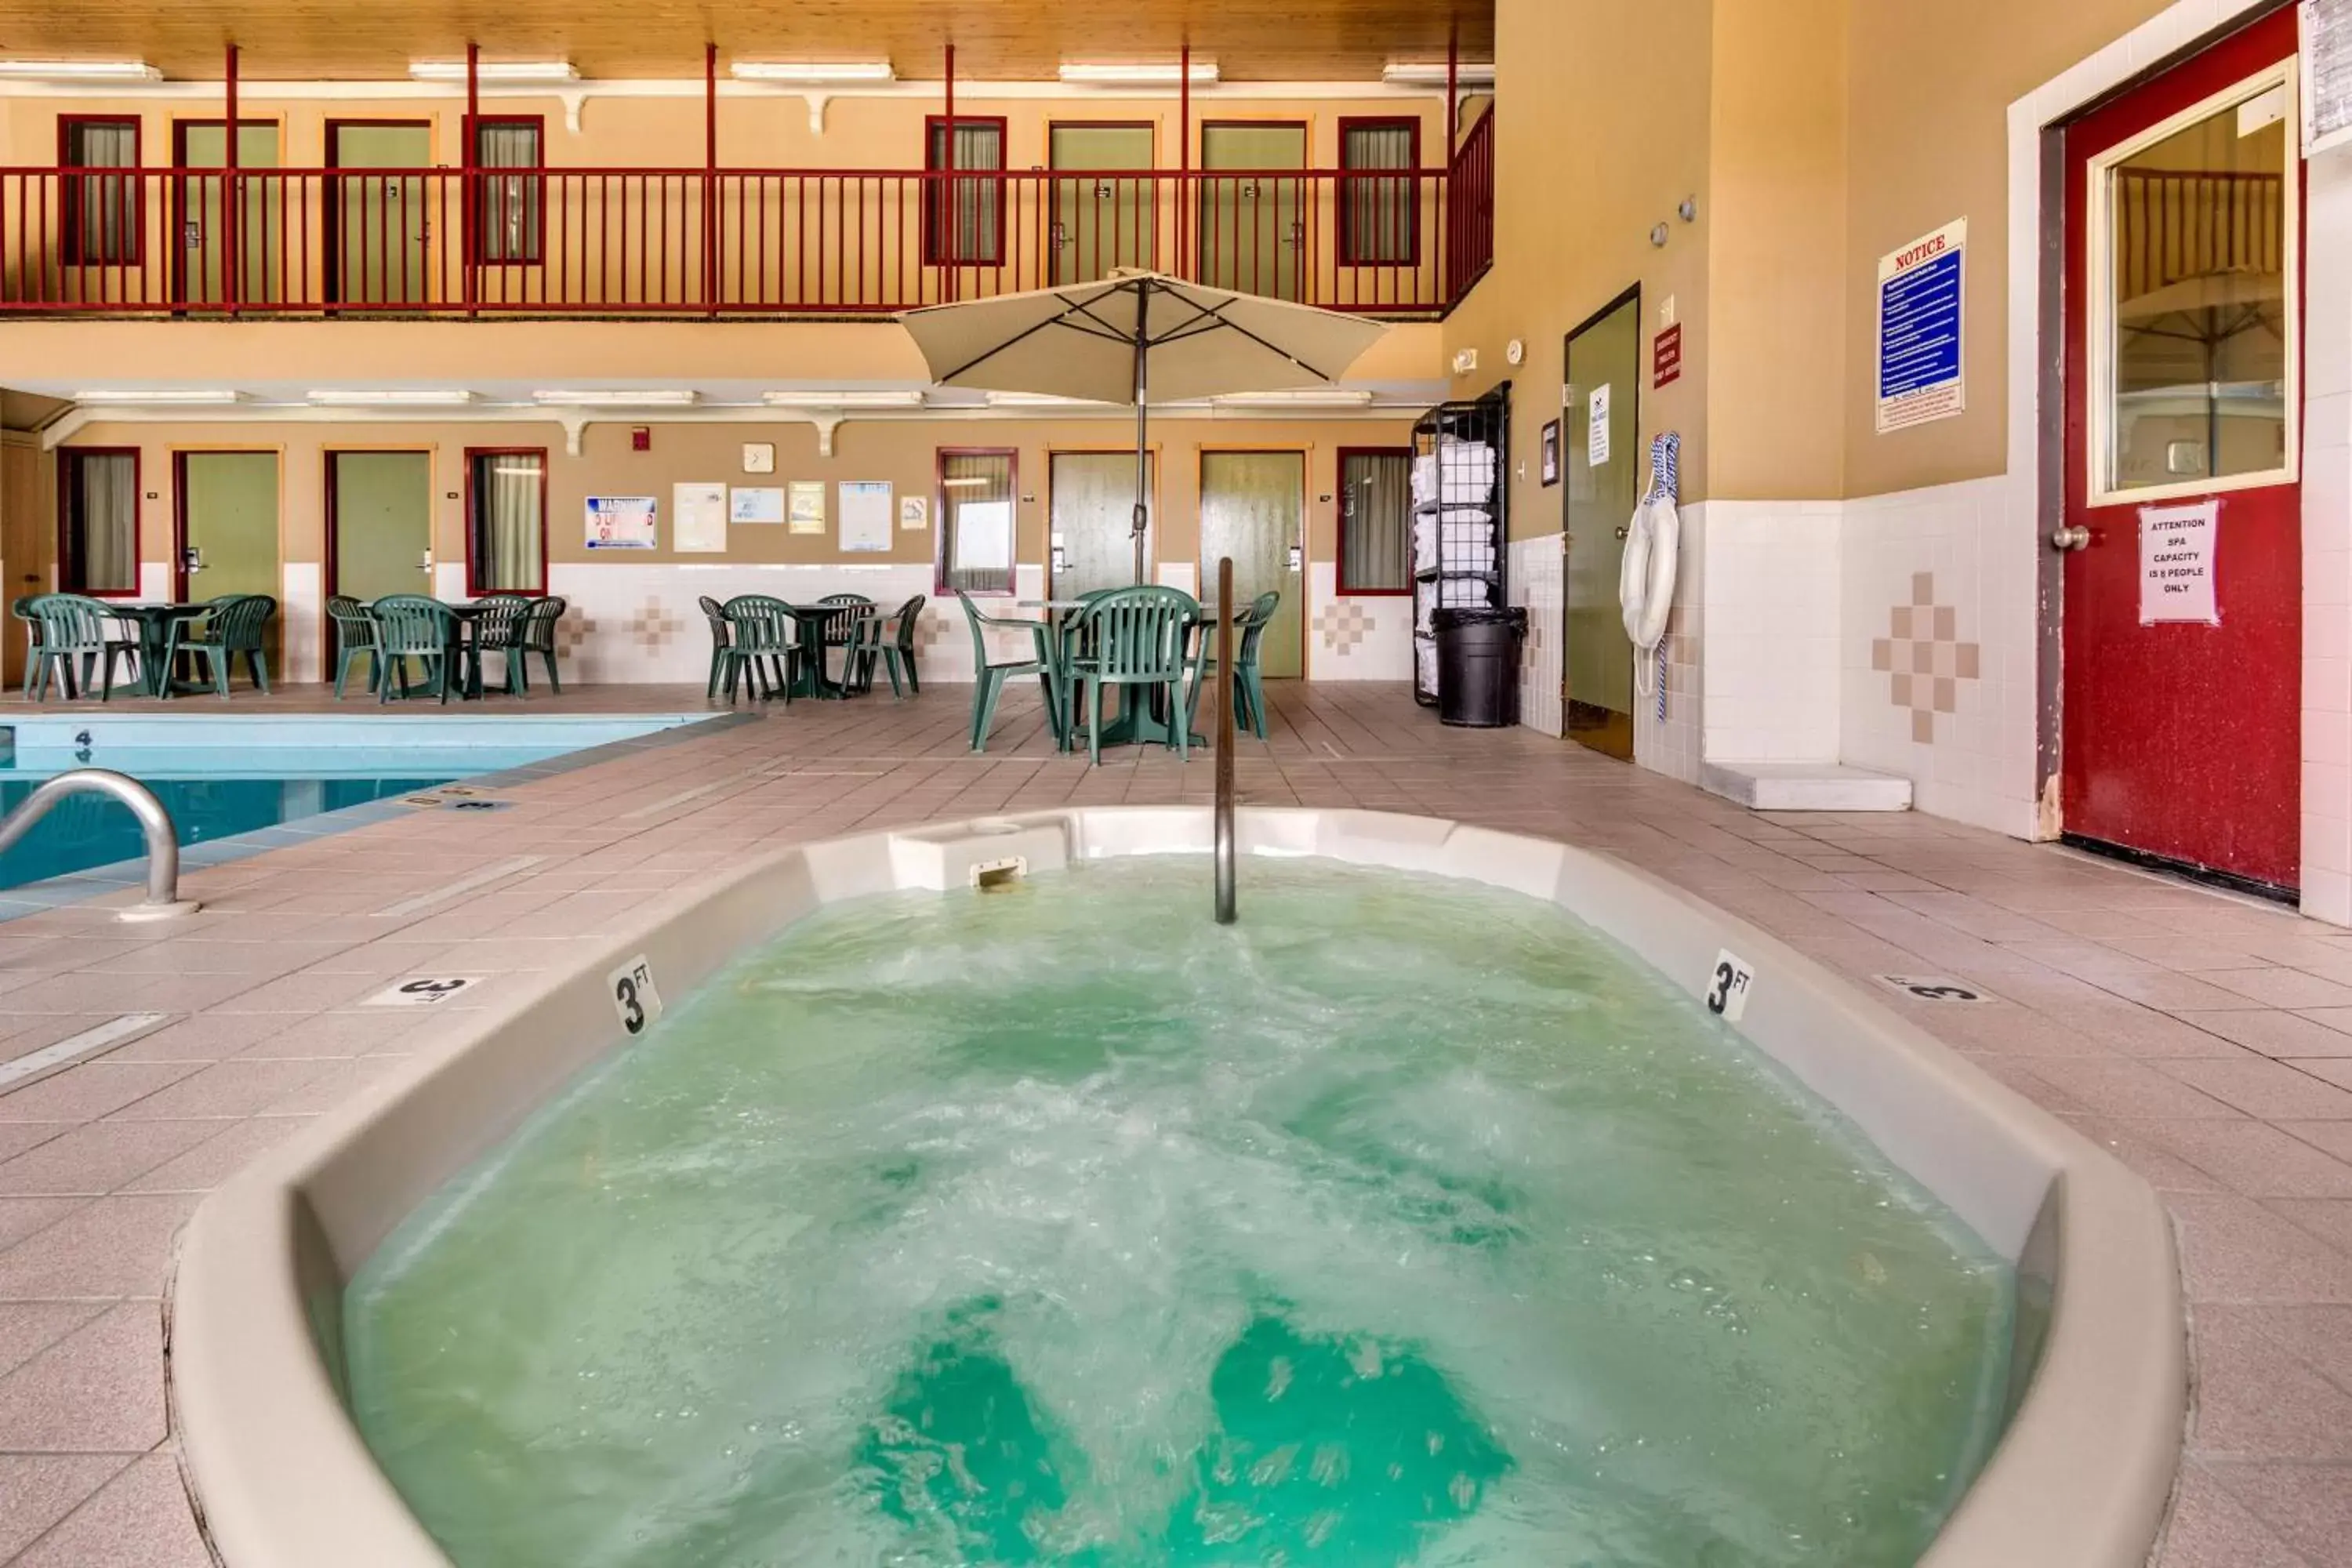 Hot Tub, Swimming Pool in Fireside Inn and Suites